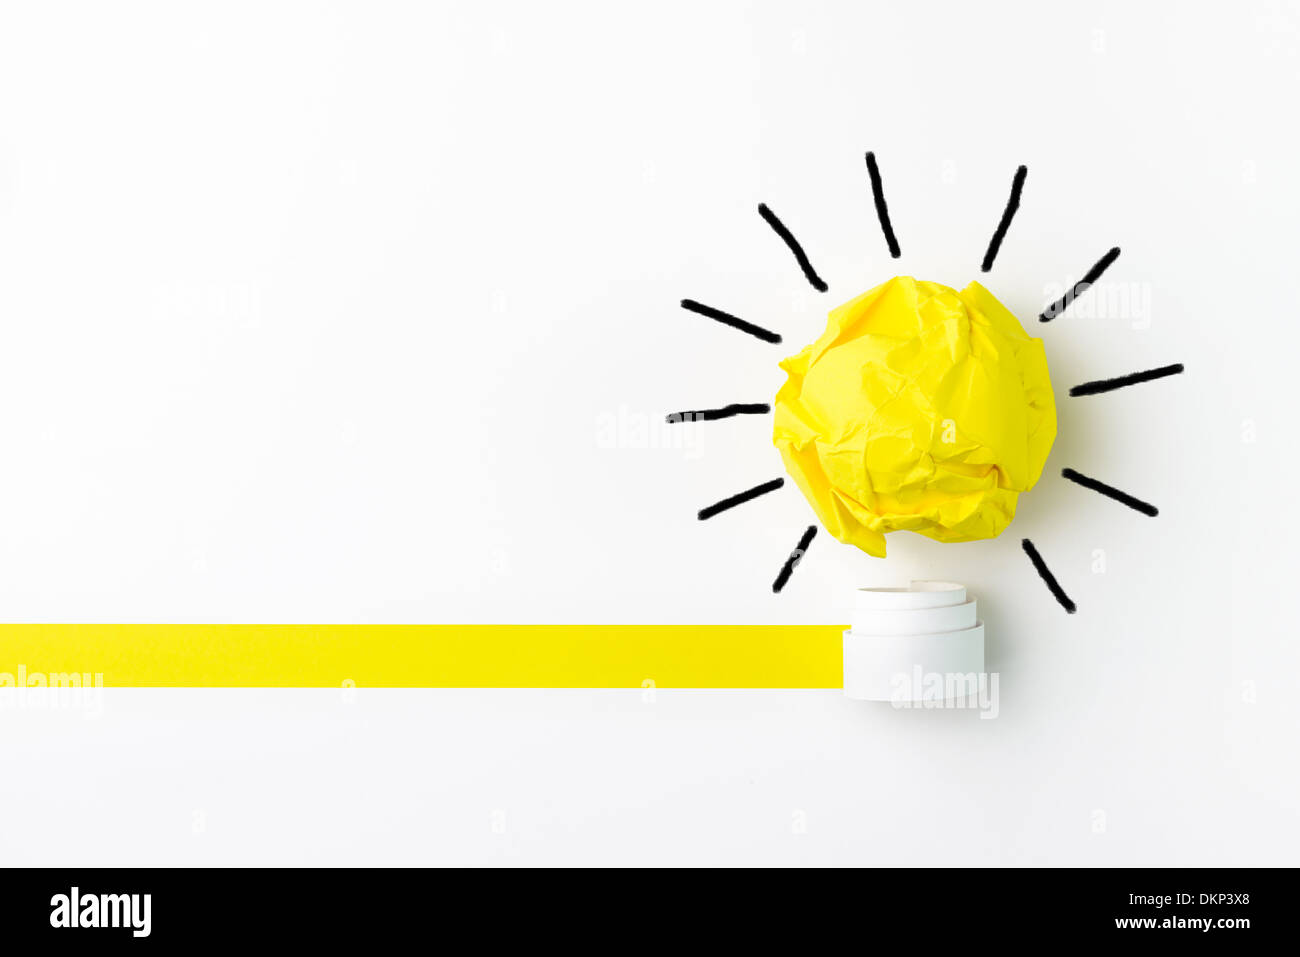 Concept of ideas using light bulb, with clipping path Stock Photo